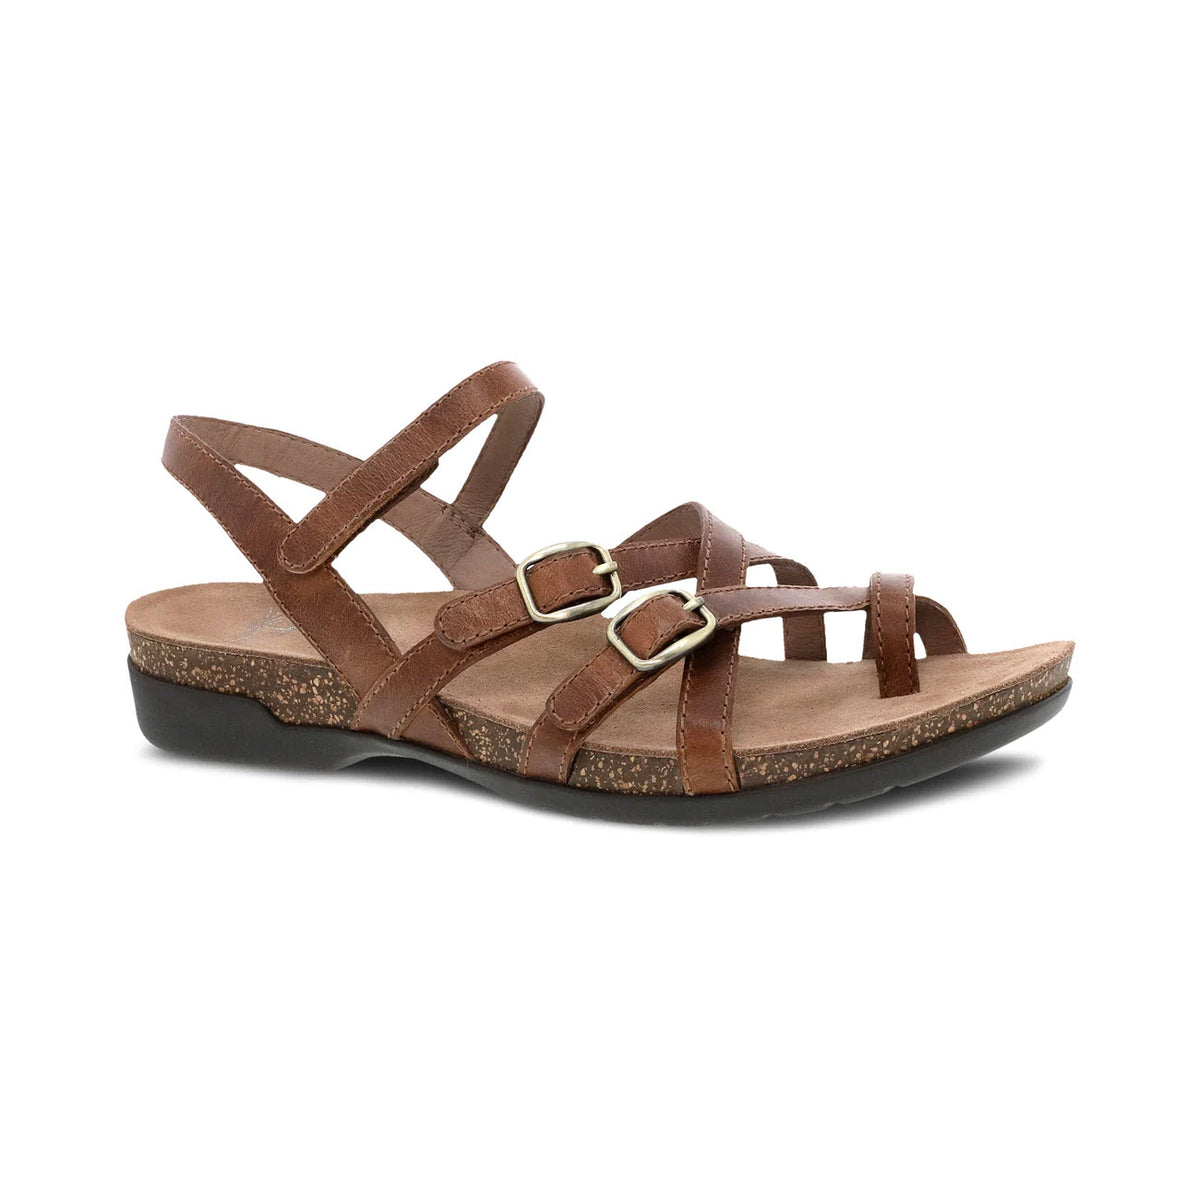 A Dansko Roslyn Tan strappy sandal with a buckle and a low heel, isolated on a white background.